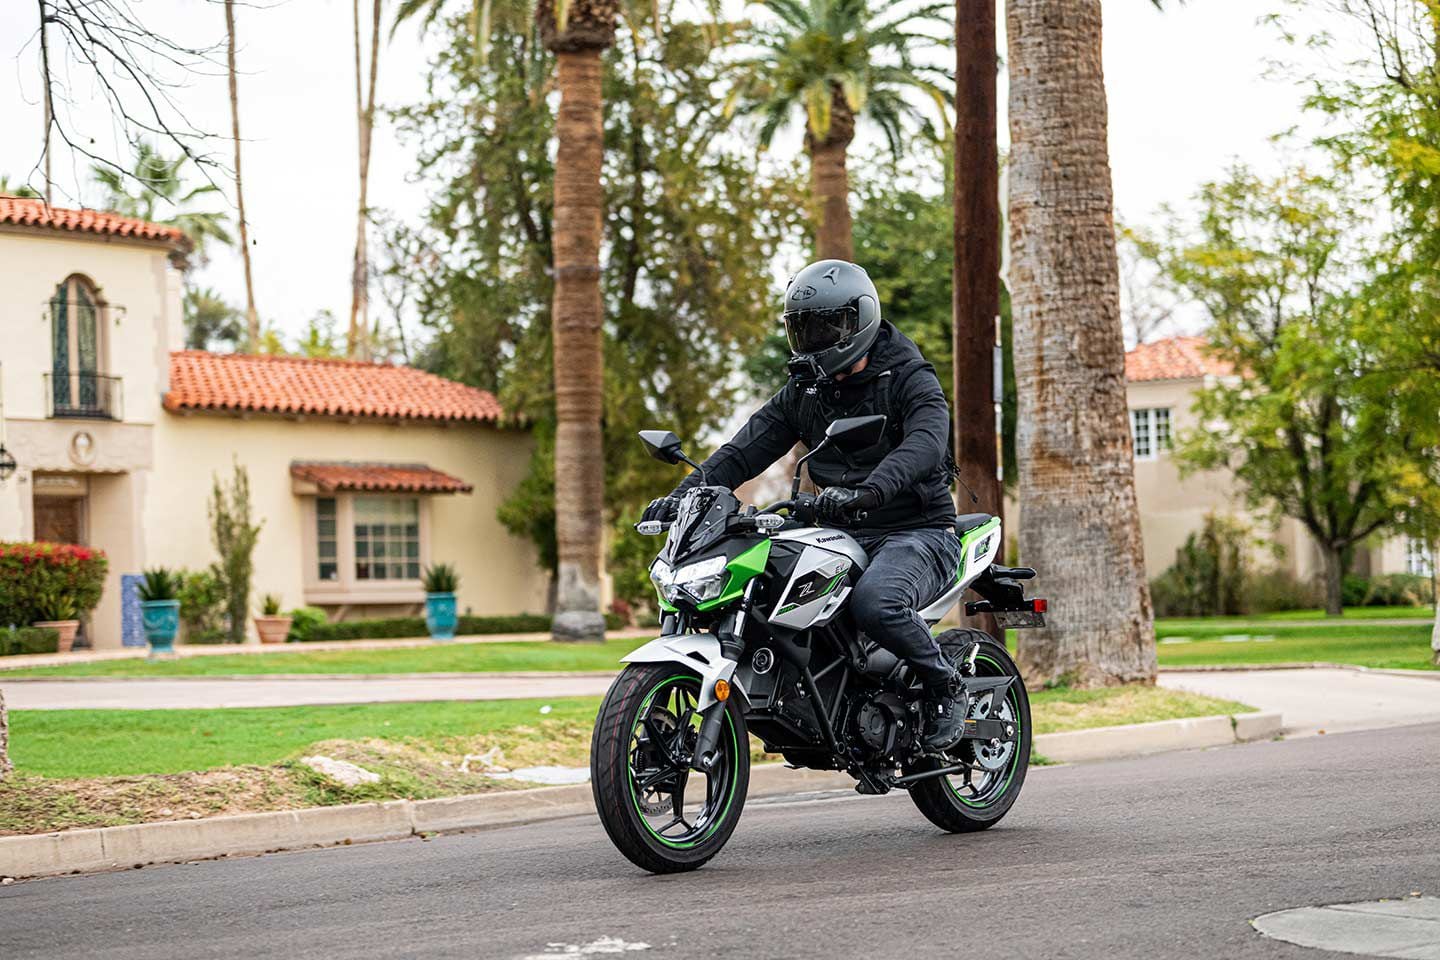 A benefit of the Ninja e-1 and Z e-1 is the quiet running, which makes it easy to cruise through your neighborhood without attracting unwanted attention.